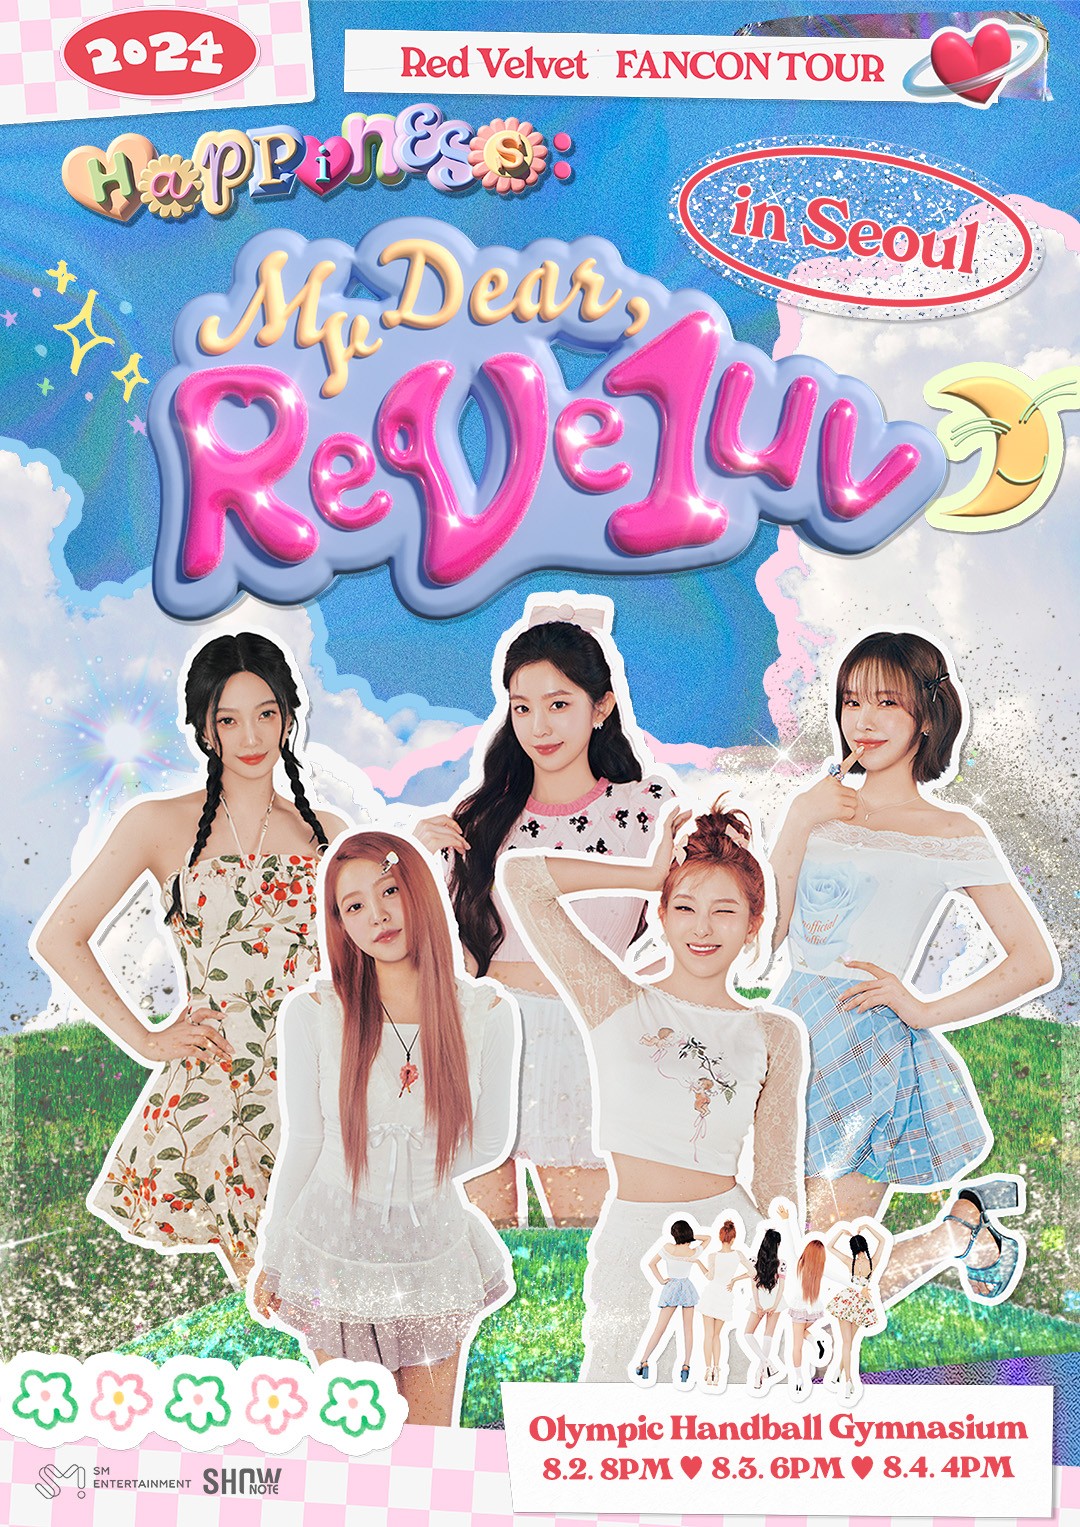 Red Velvet, Fan Con All Tickets Sold Out… Additional Performance Added in Seoul